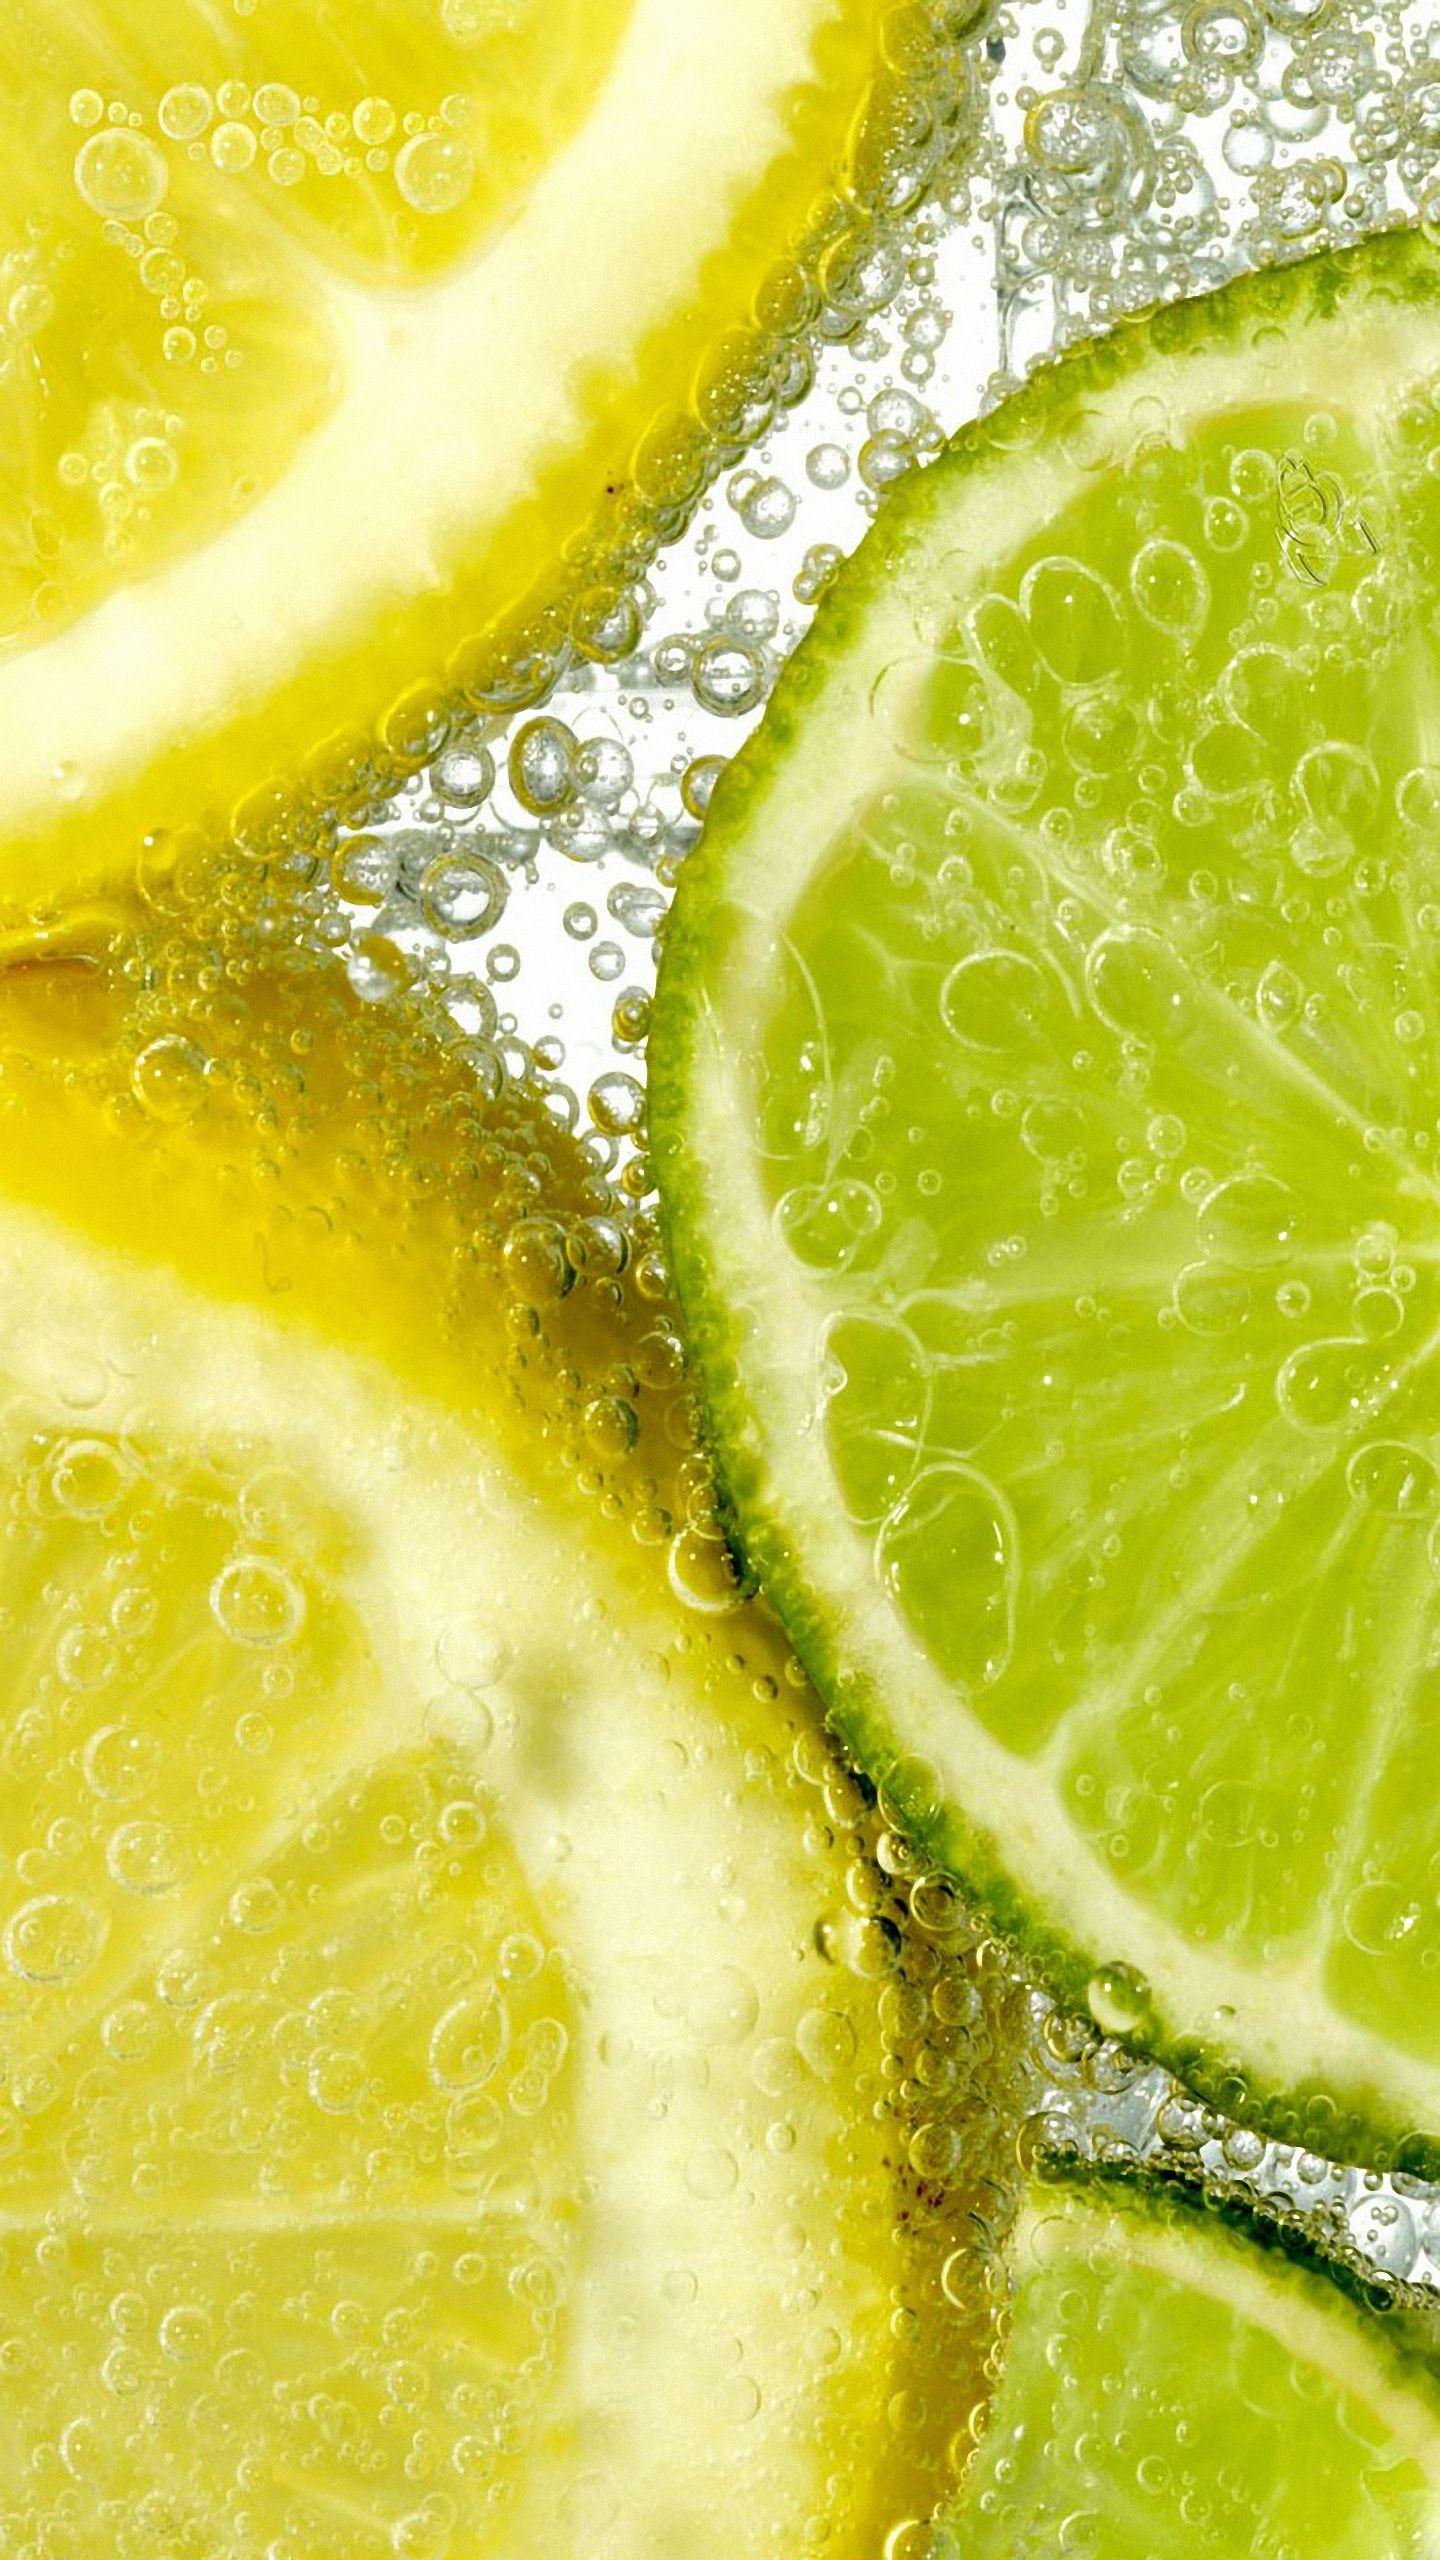 Lemon and Lime #fruit #food. Galaxy S7 Wallpaper in 2019